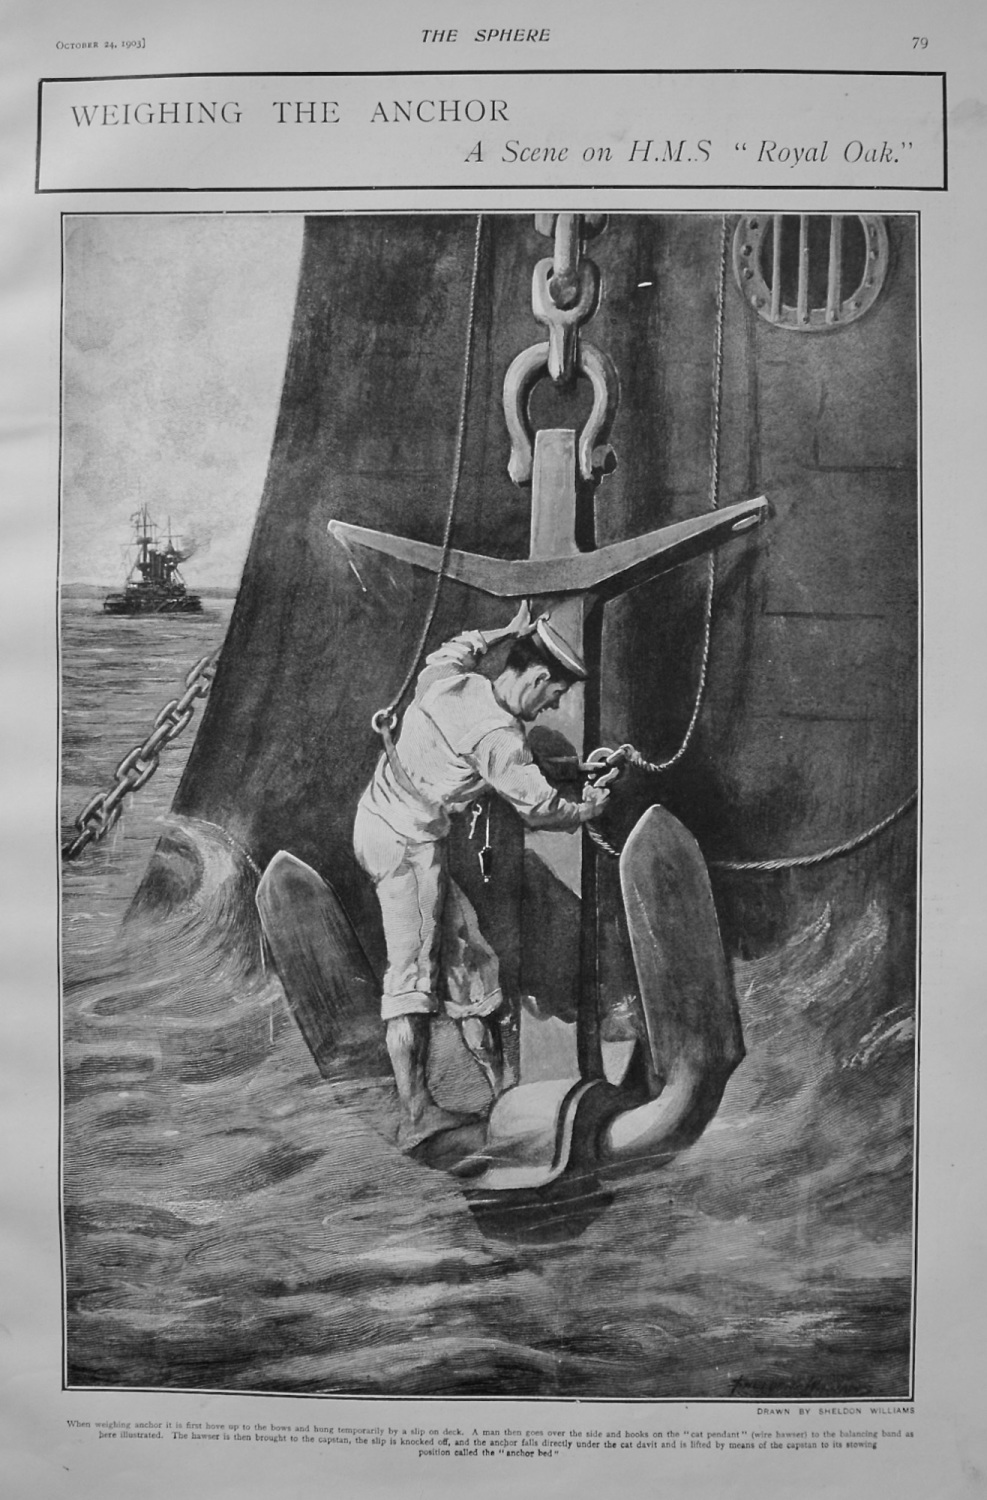 Weighing the Anchor : A Scene on H.M.S. 